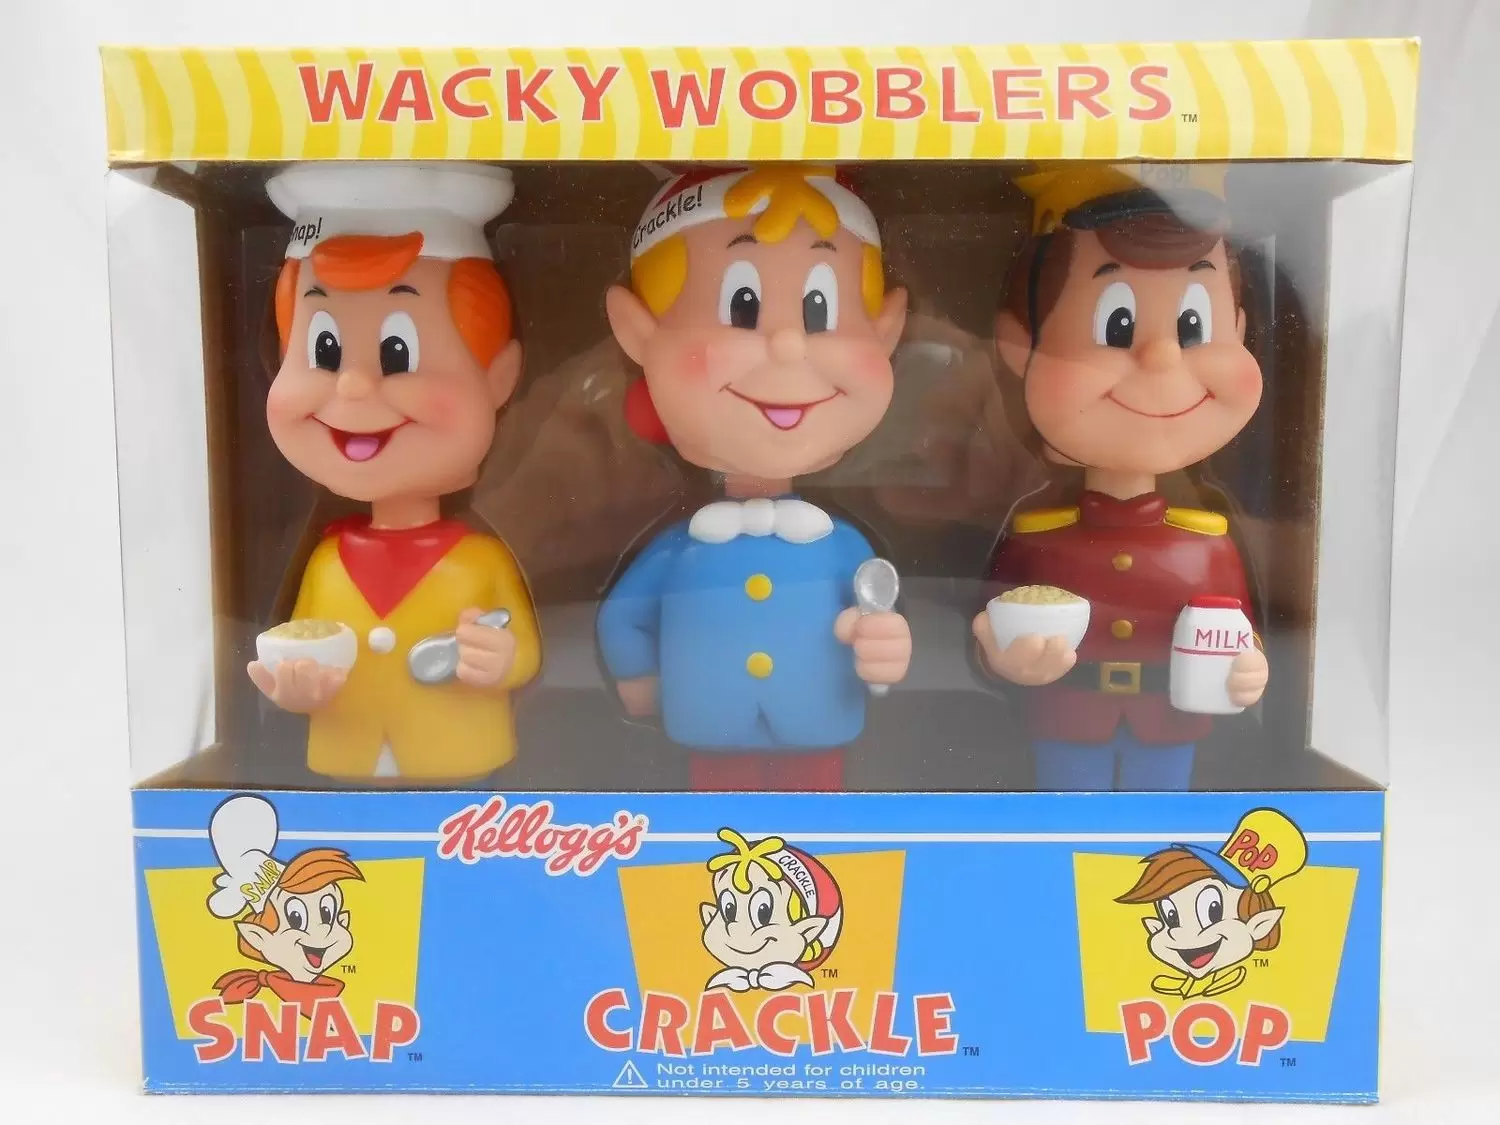 Wacky Wobbler Ad Icons - Crackle and Pop 3 Pack